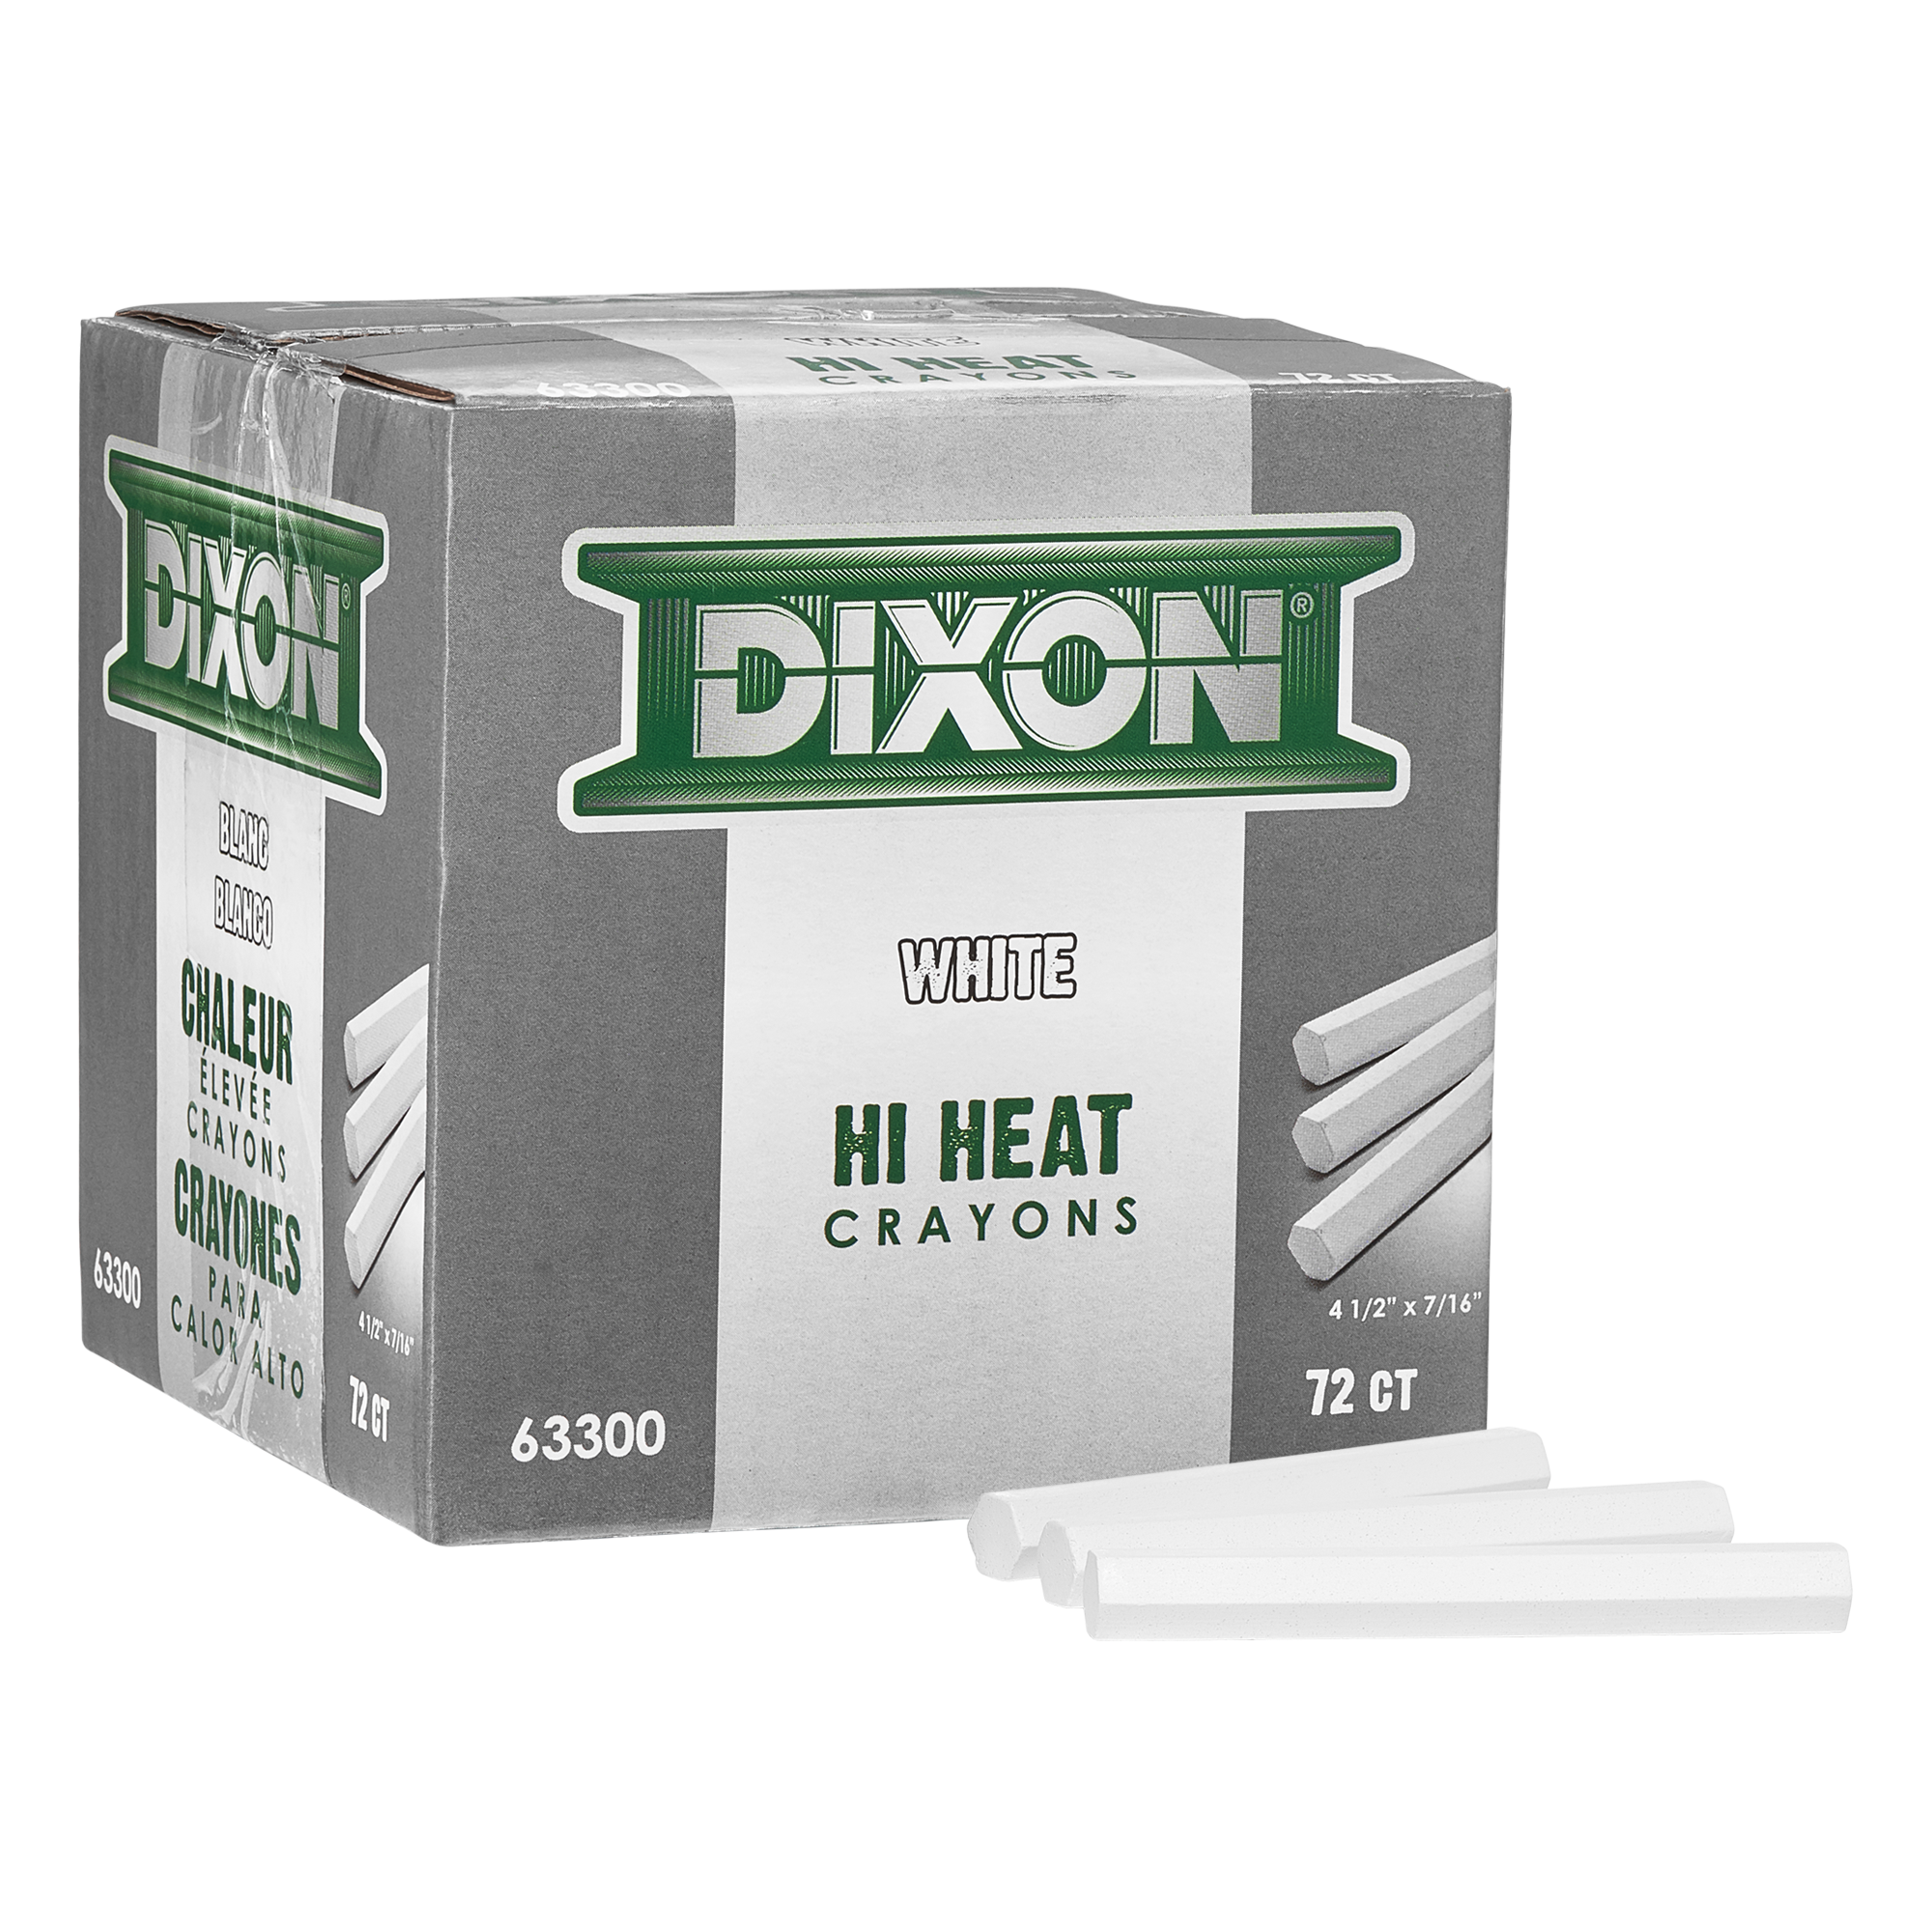 Dixon® Industrial Lumber Crayons, 1 Each, White